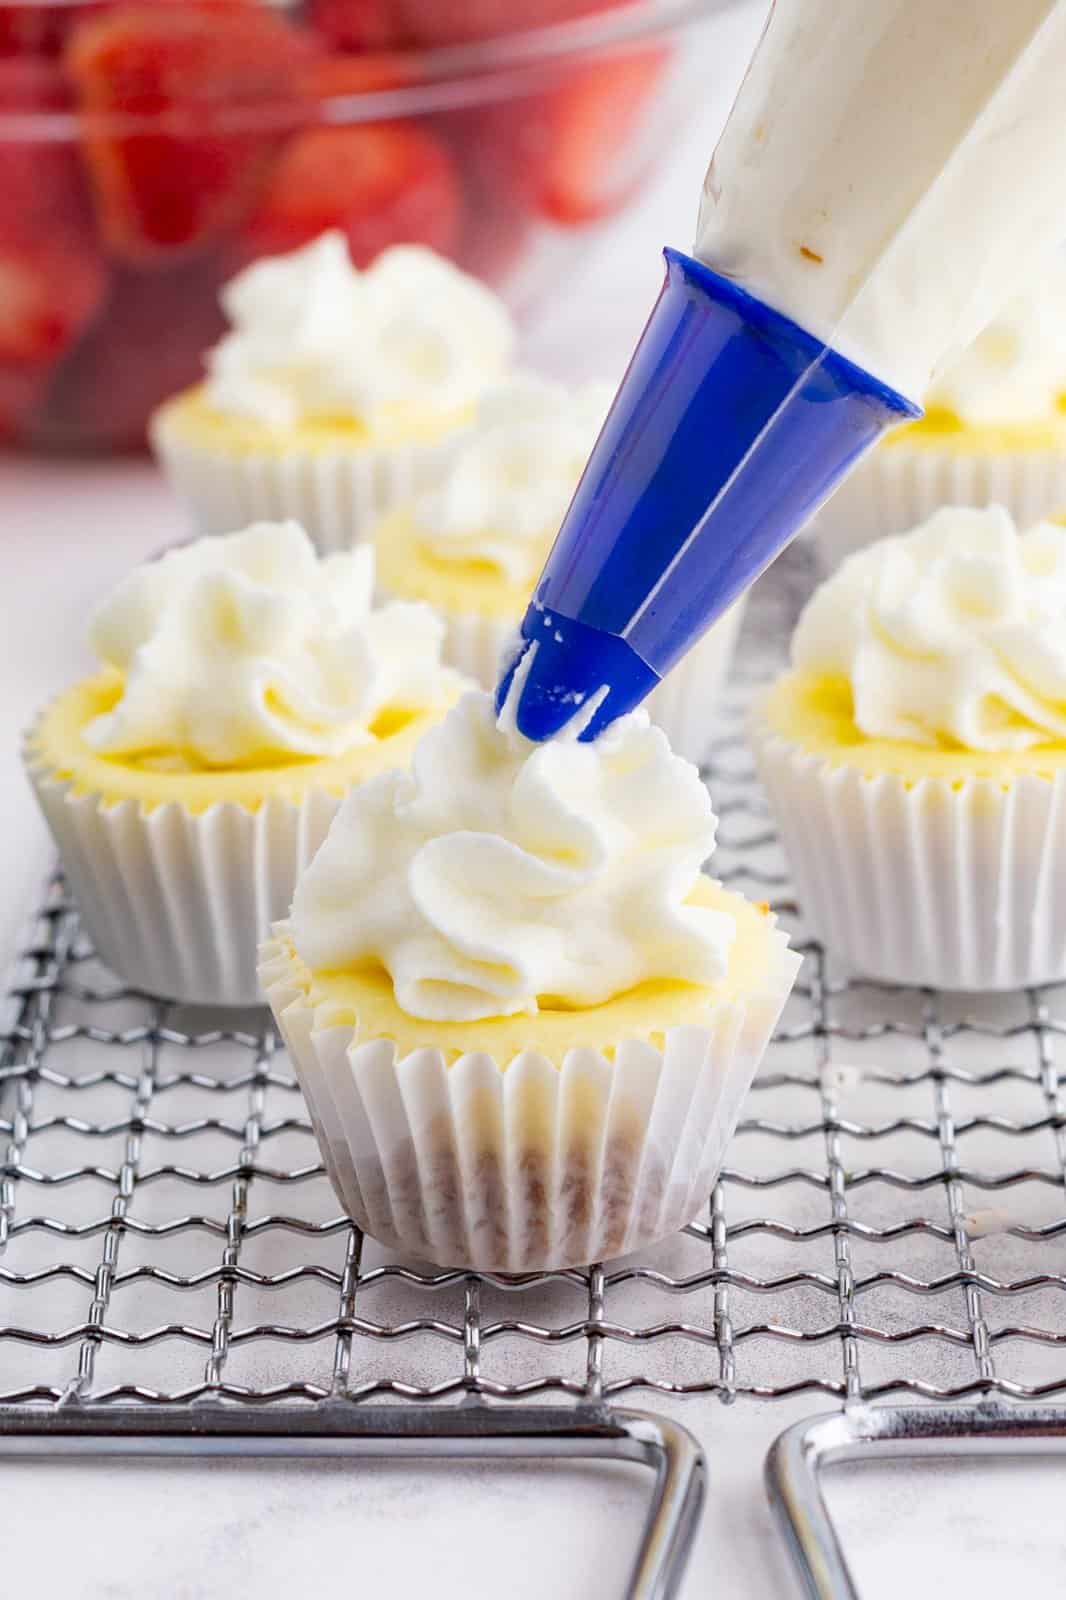 Piping bag piping whipped cream to tops of mini cheesecakes.